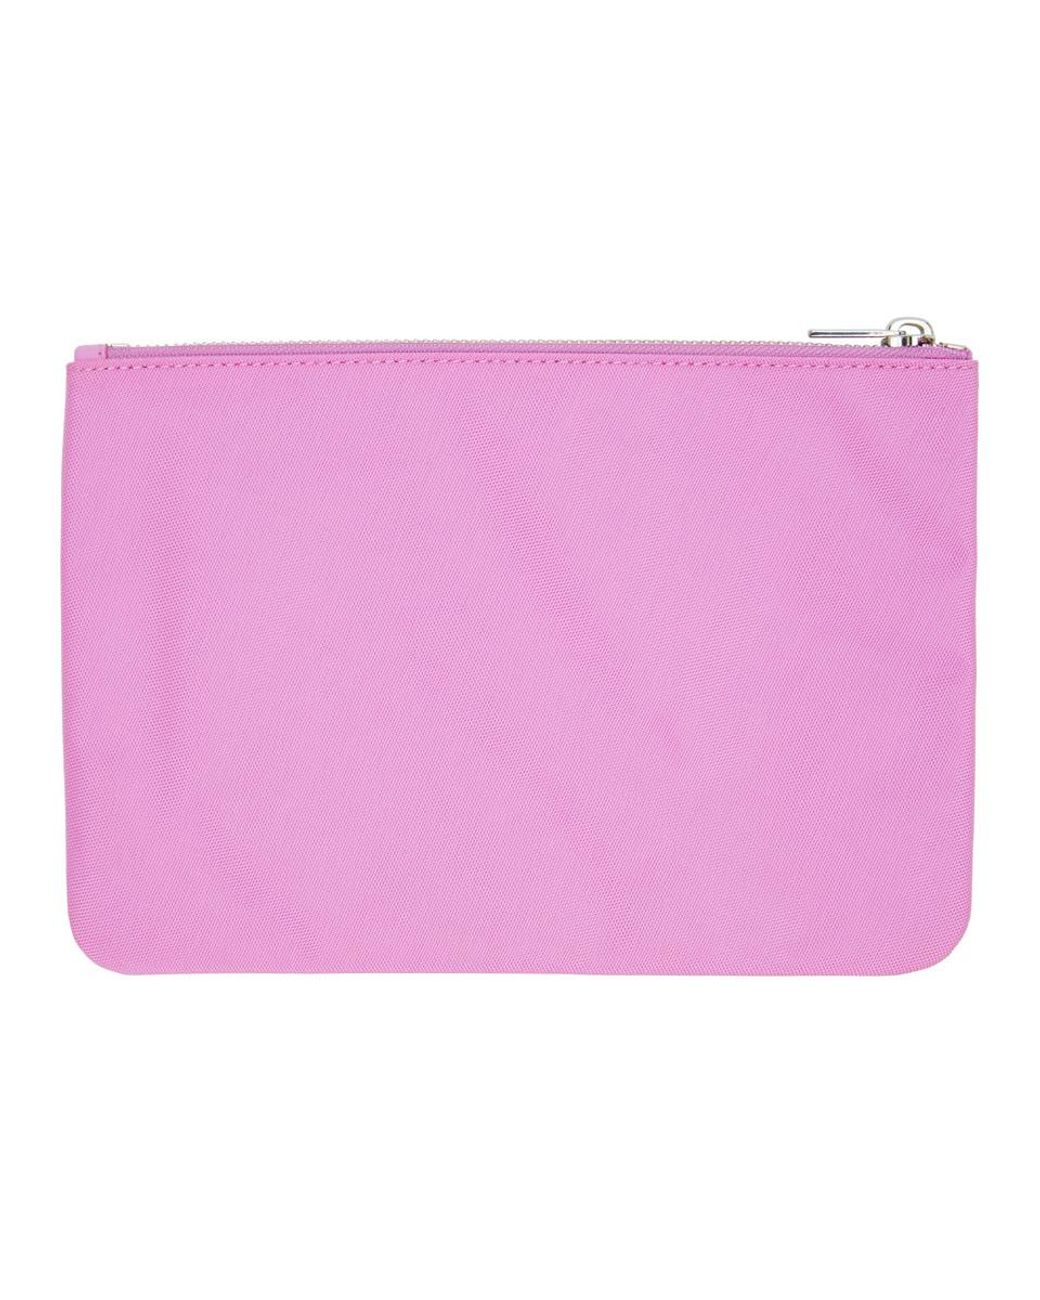 Marc Jacobs Women's Pink Heaven By Crazy Daisy Pouch